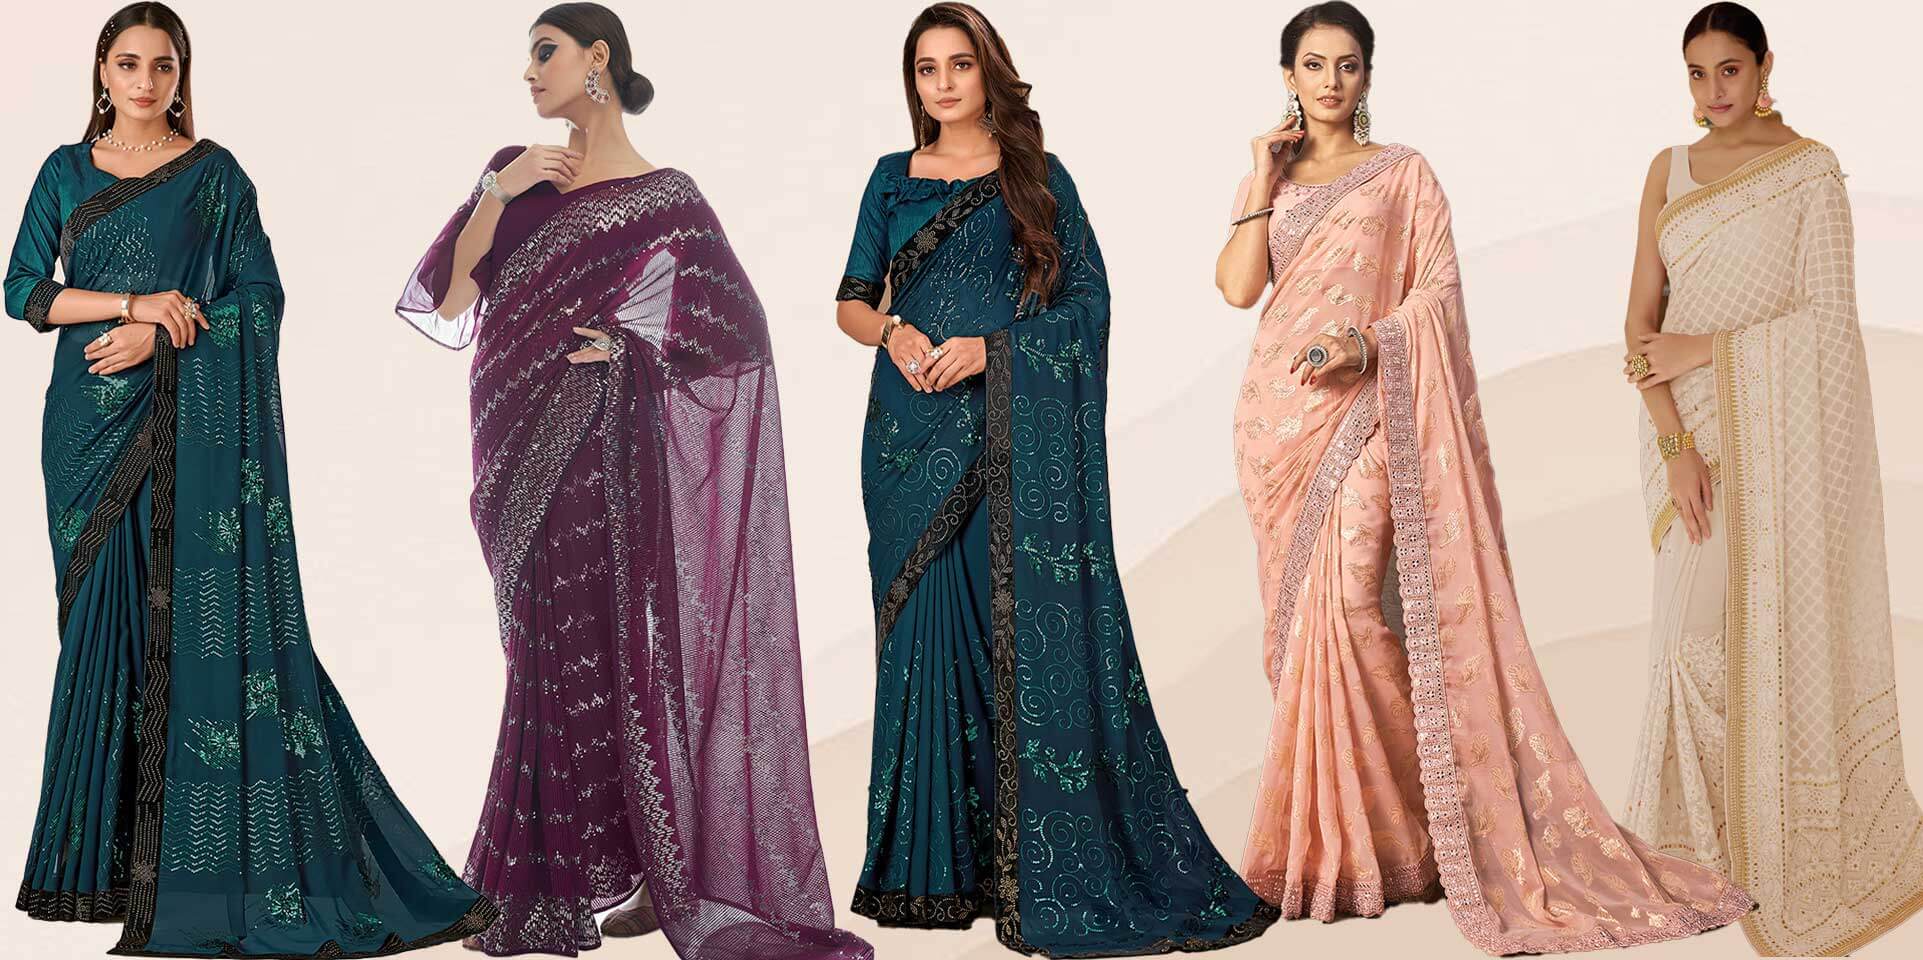 Make a Fashion Statement Wearing Different Types of Traditional Indian Dresses for Women